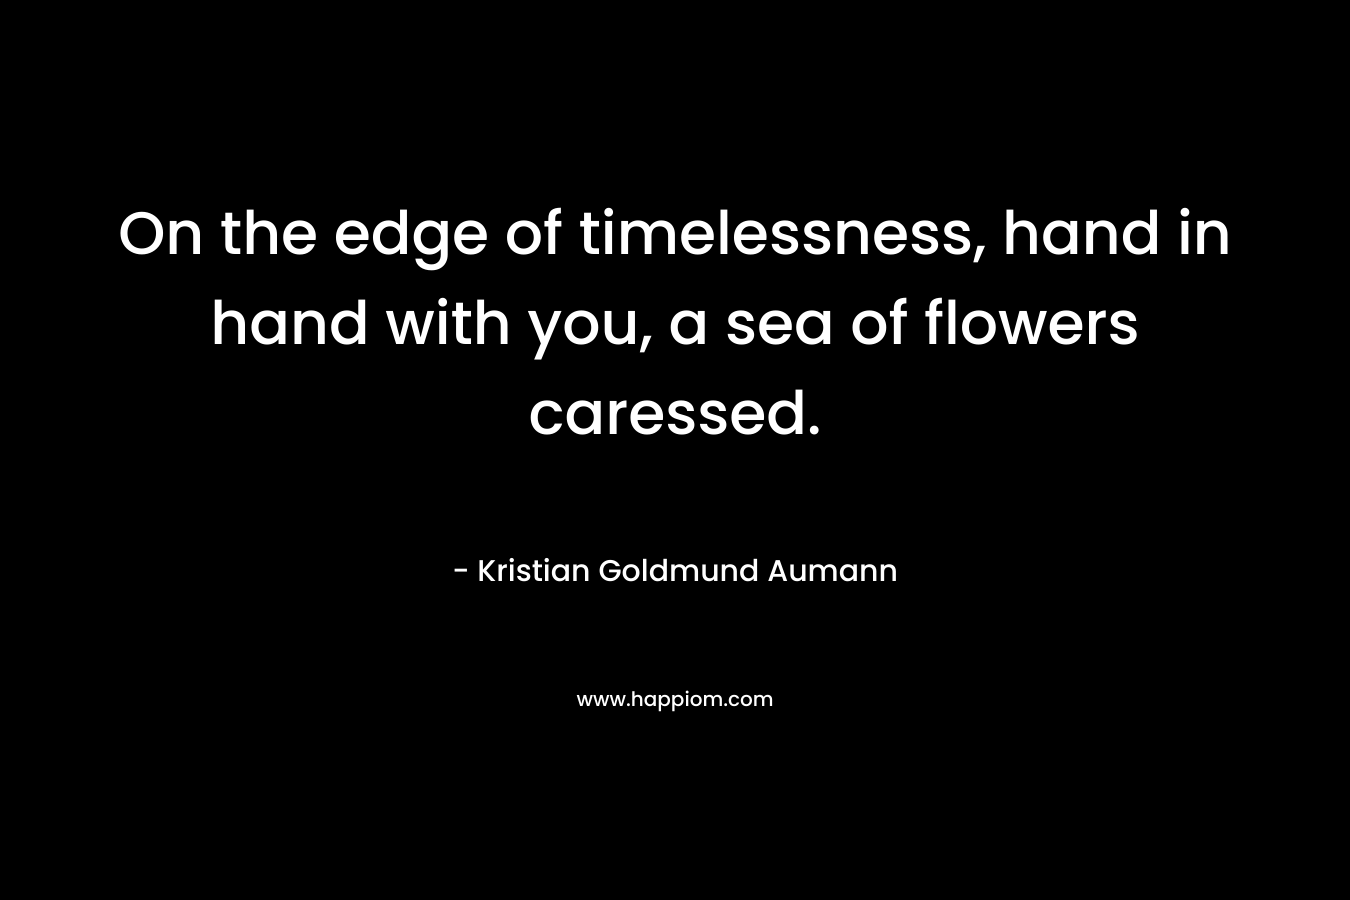 On the edge of timelessness, hand in hand with you, a sea of flowers caressed. – Kristian Goldmund Aumann